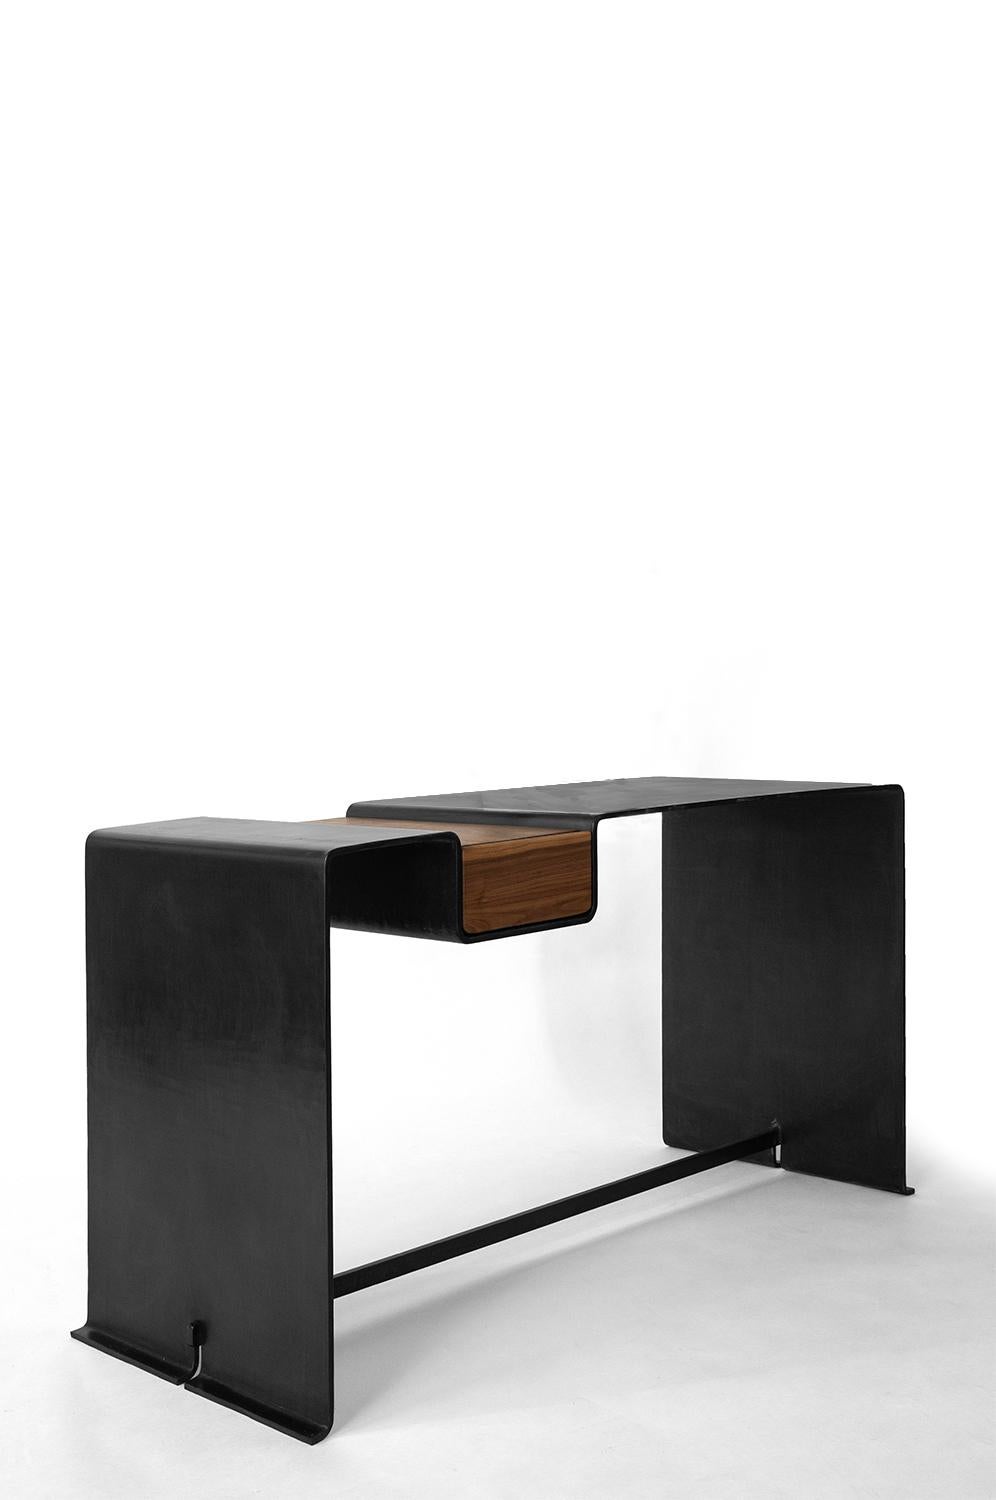 DESK NO. 1
J.M. Szymanski
d. 2023

With the combined power of our steel smith and the modern machine, this desk/vanity is hydrology bent from 3/8” thick solid steel. The table is hand finished in a rich and warm black patina. A modern classic for